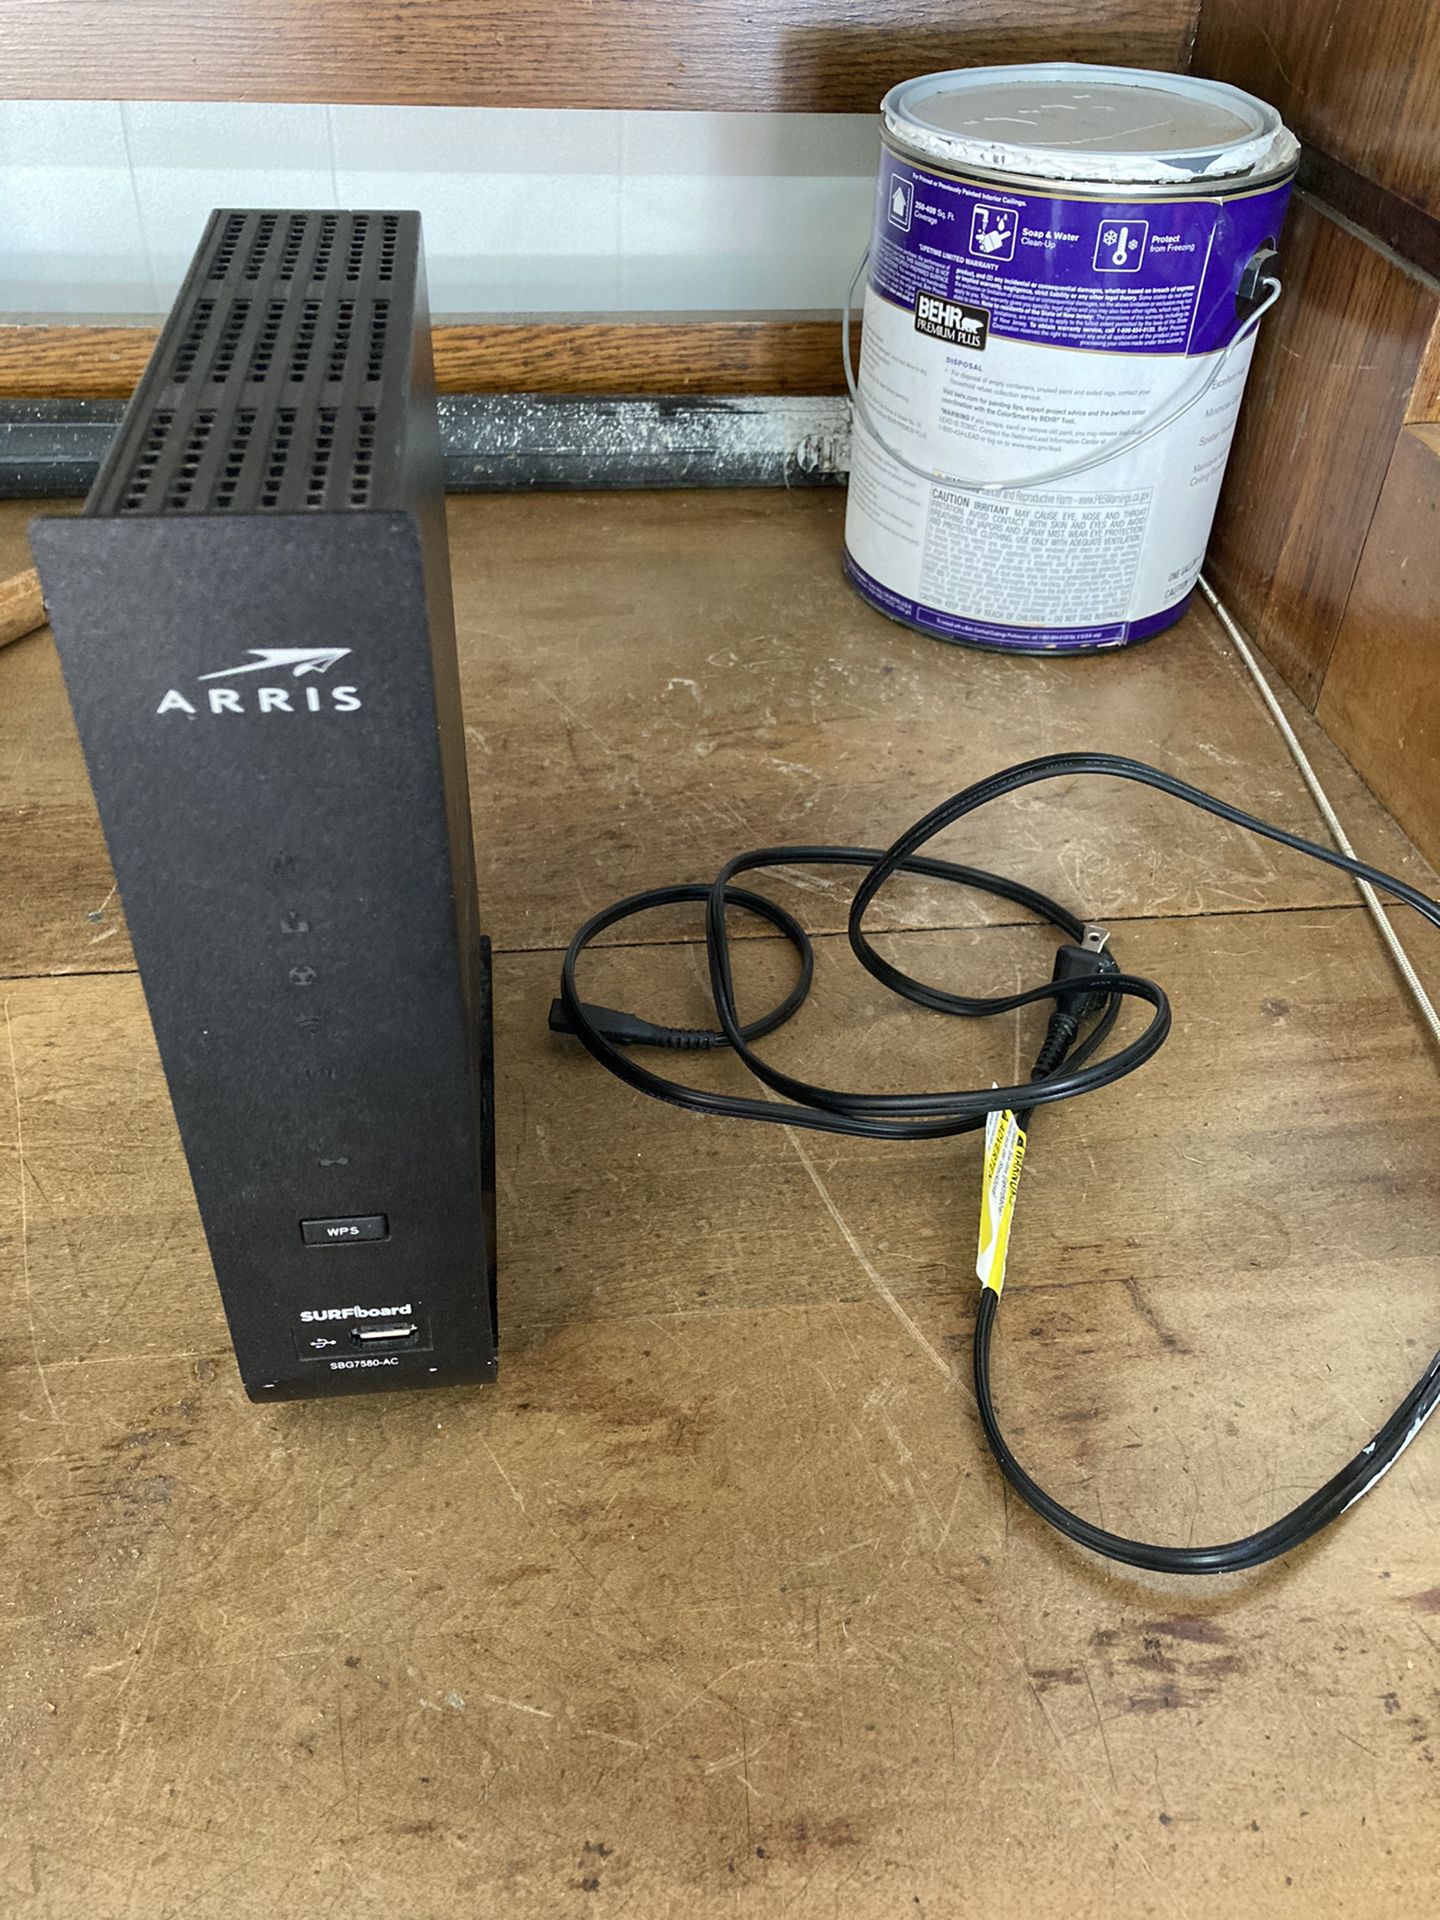 Arris modem and router surfboard